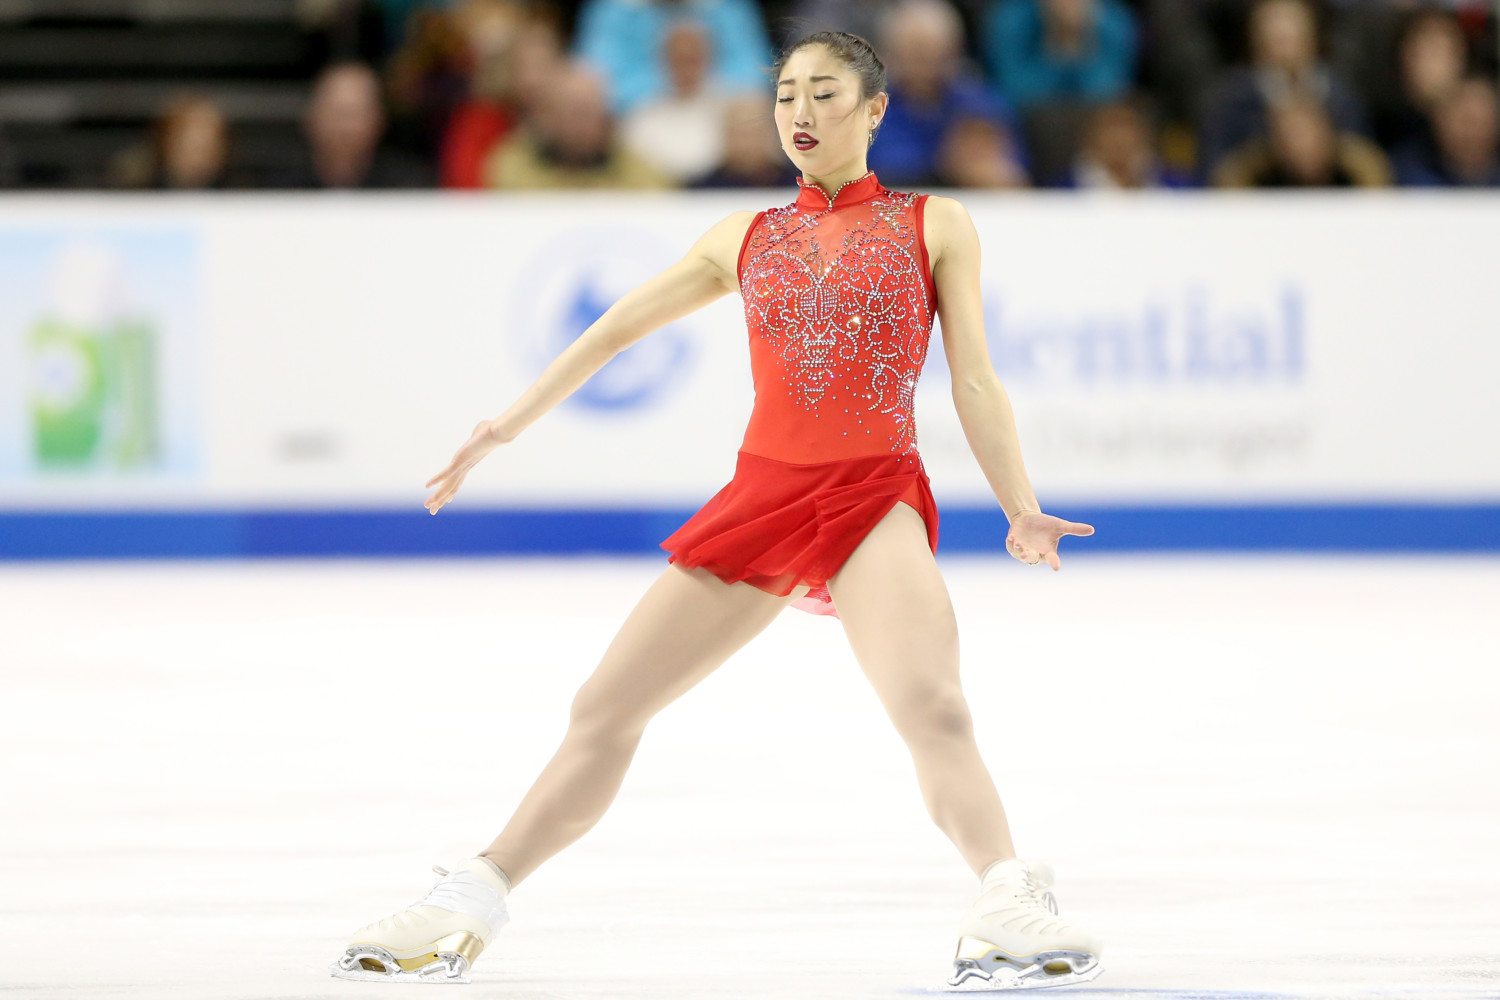 2018 Prudential U.S. Figure Skating Championships - Day 3